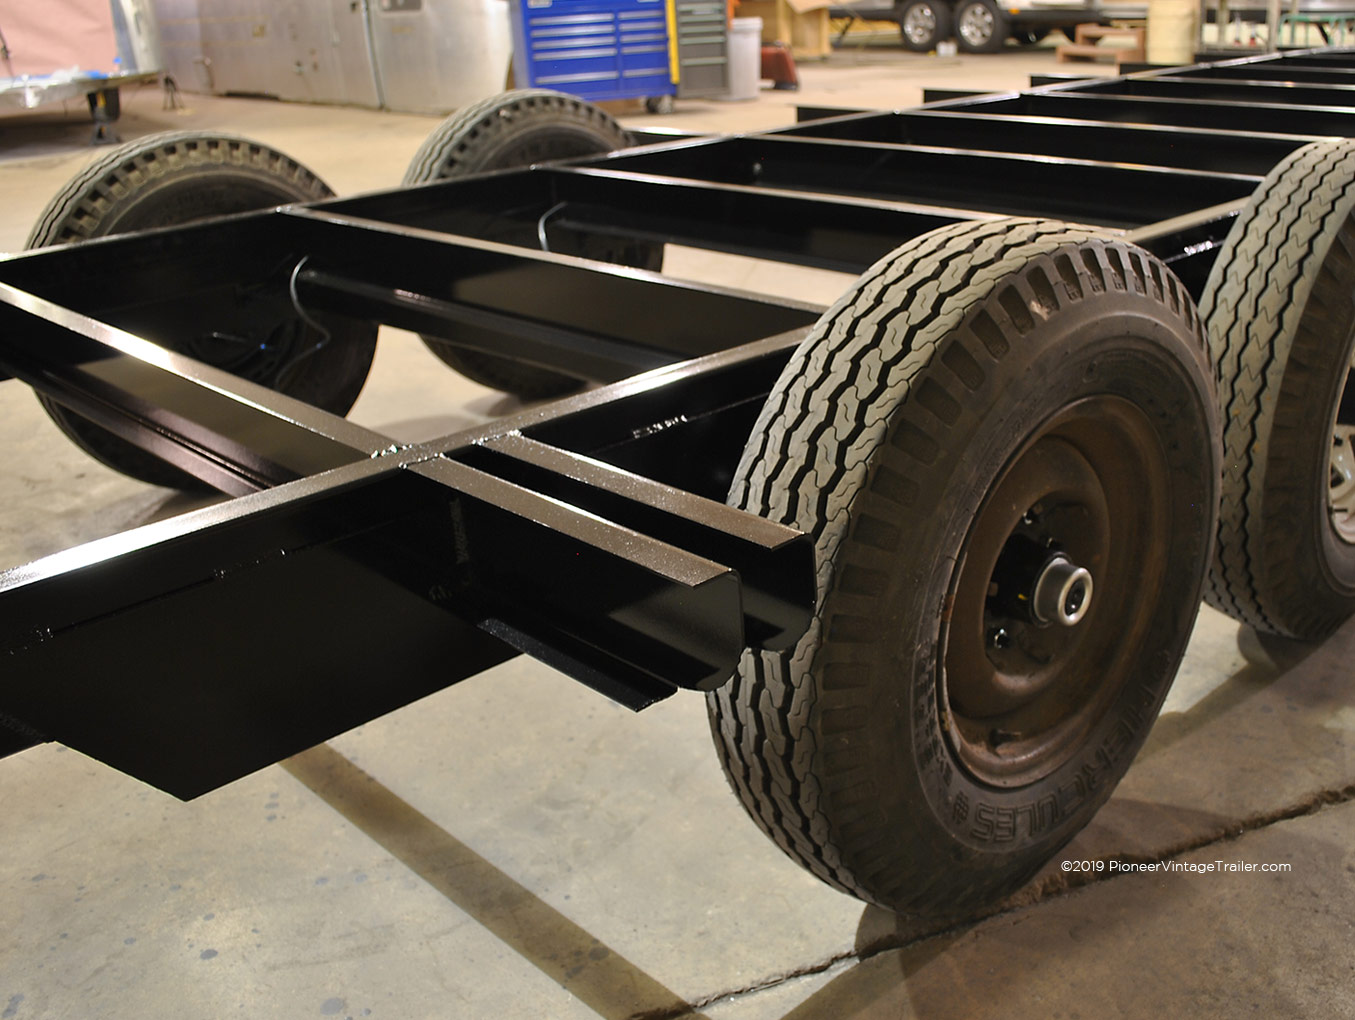 Airstream Sovereign trailer frame during fabrication